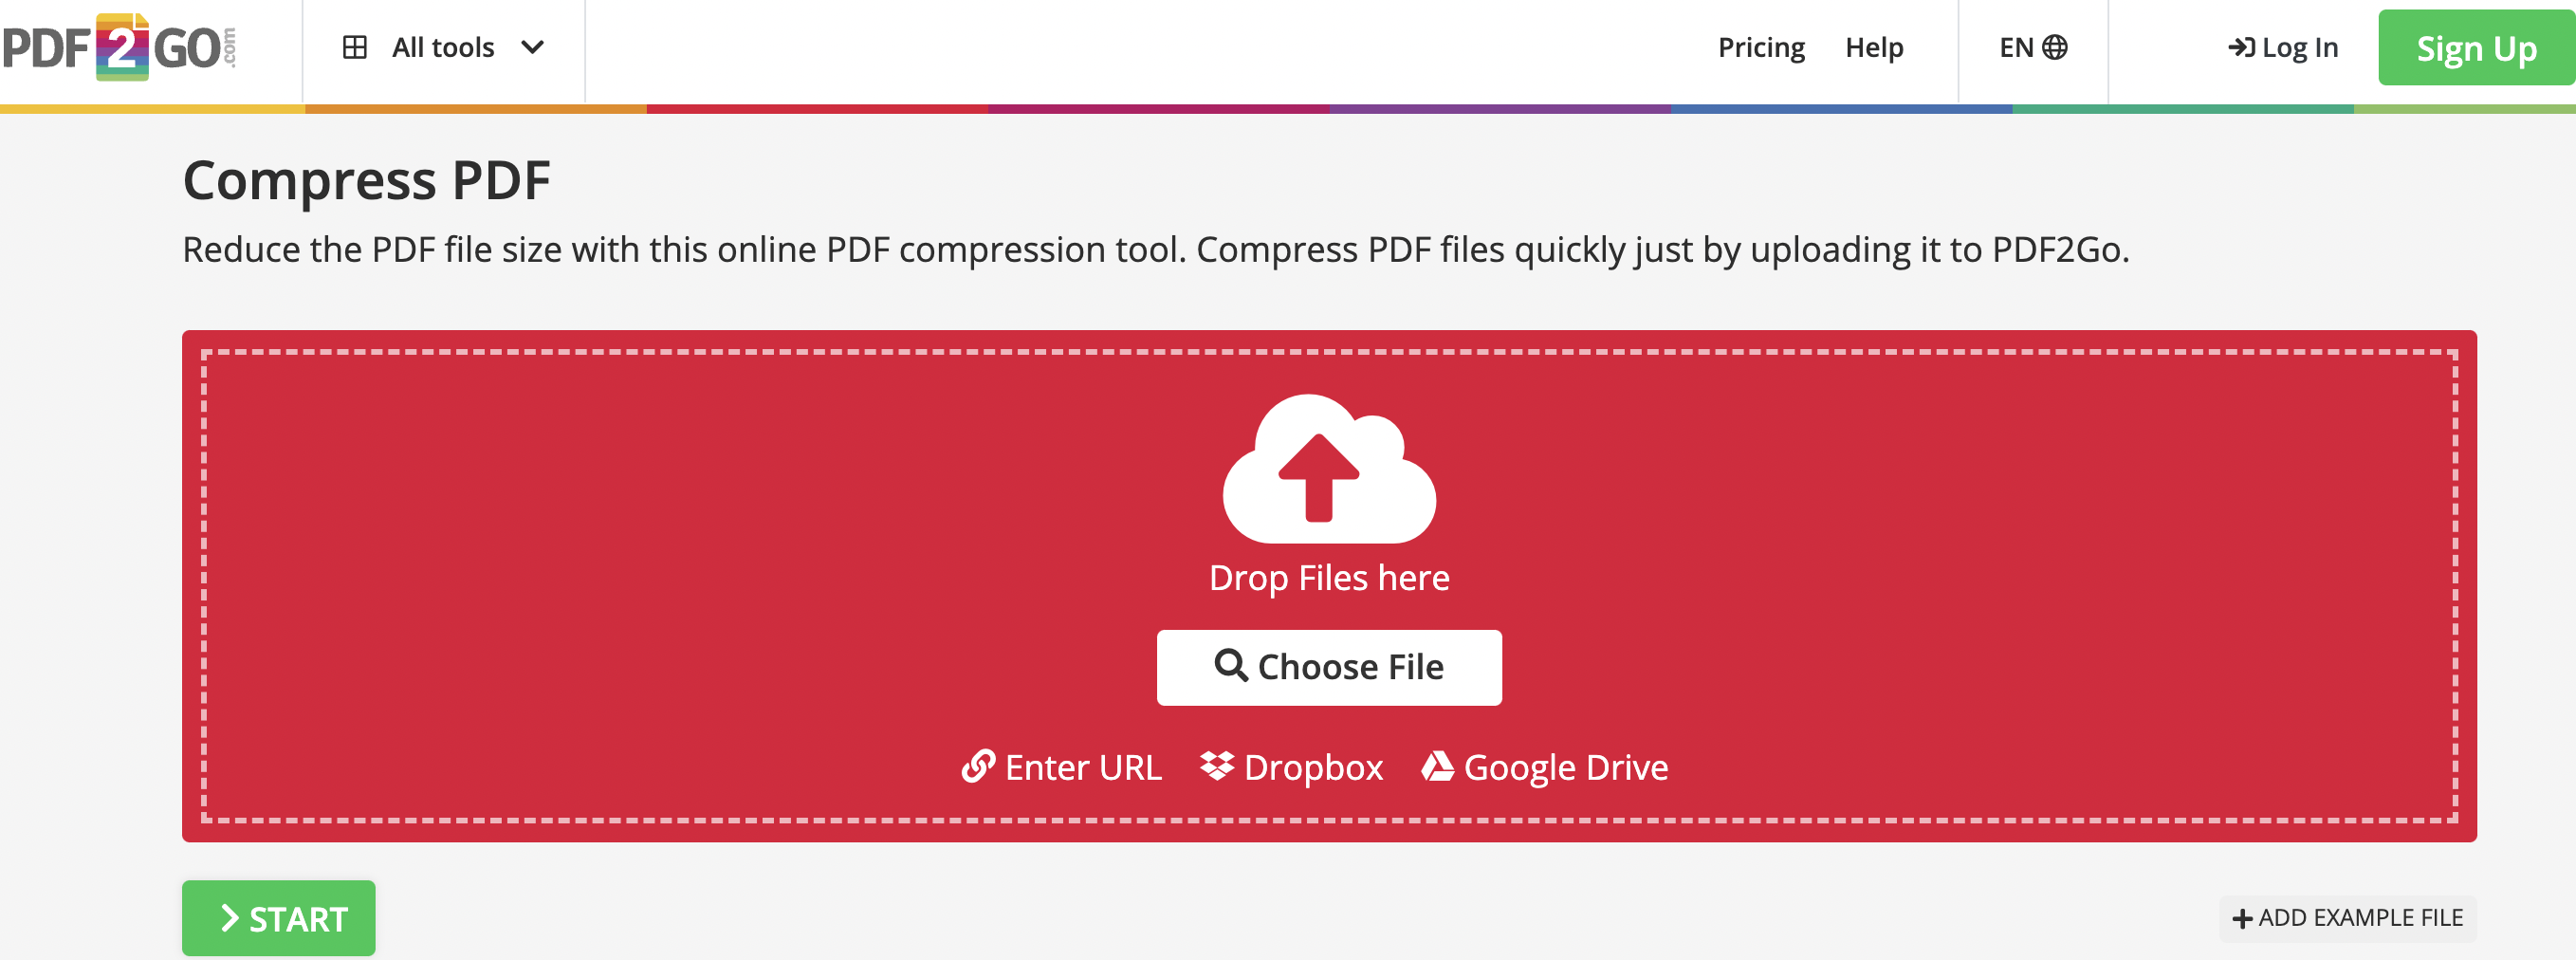 Compress PDF for email